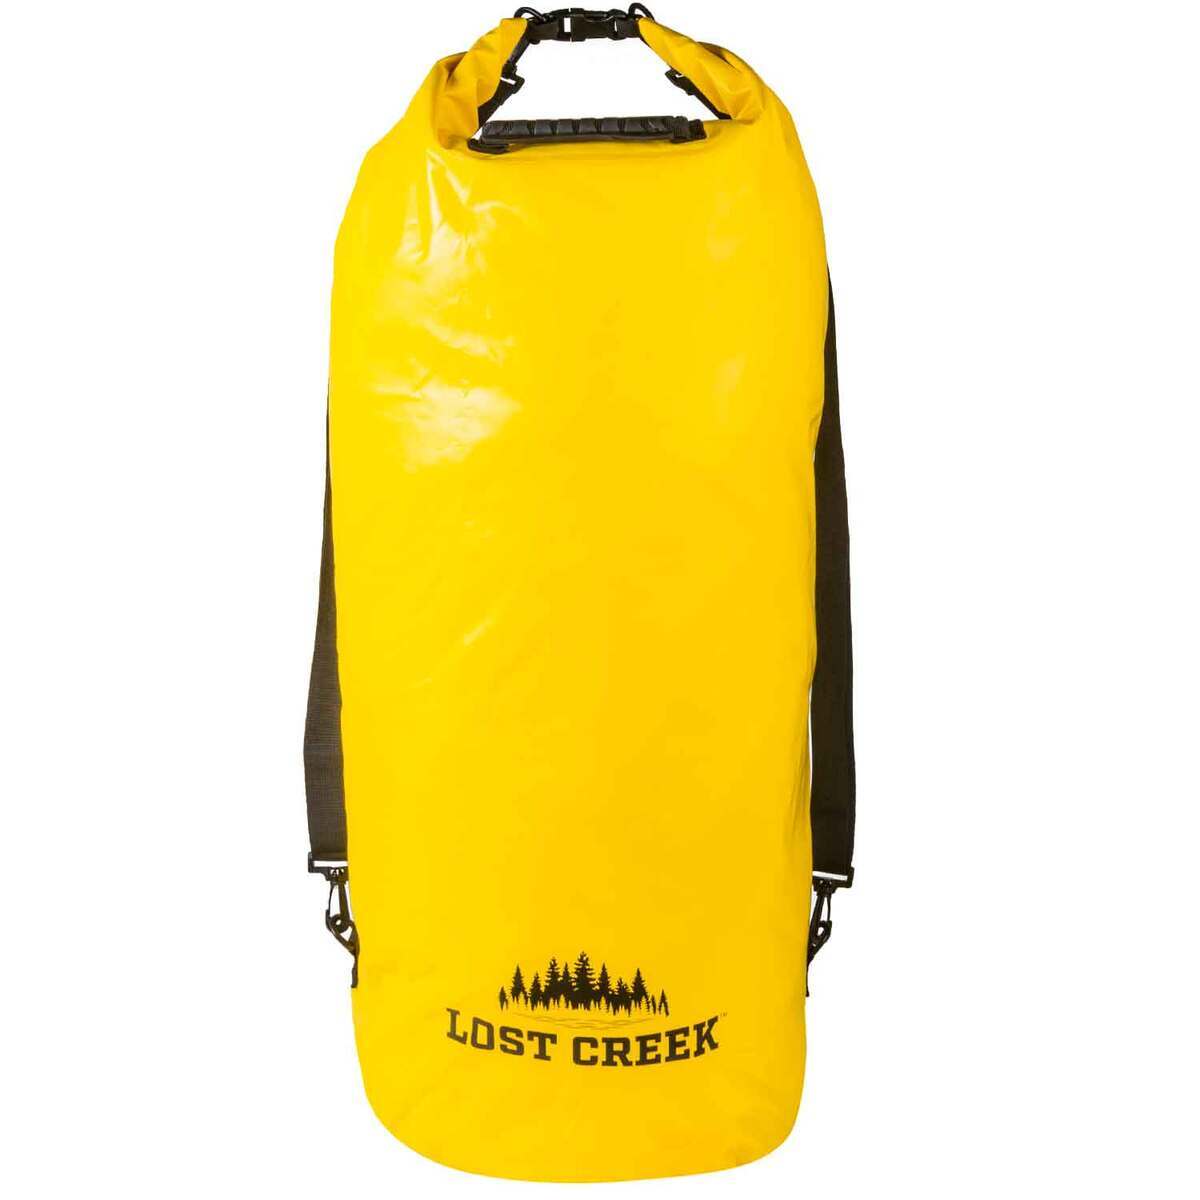 Lost Creek 100 Liter Dry Bag - Yellow by Sportsman's Warehouse